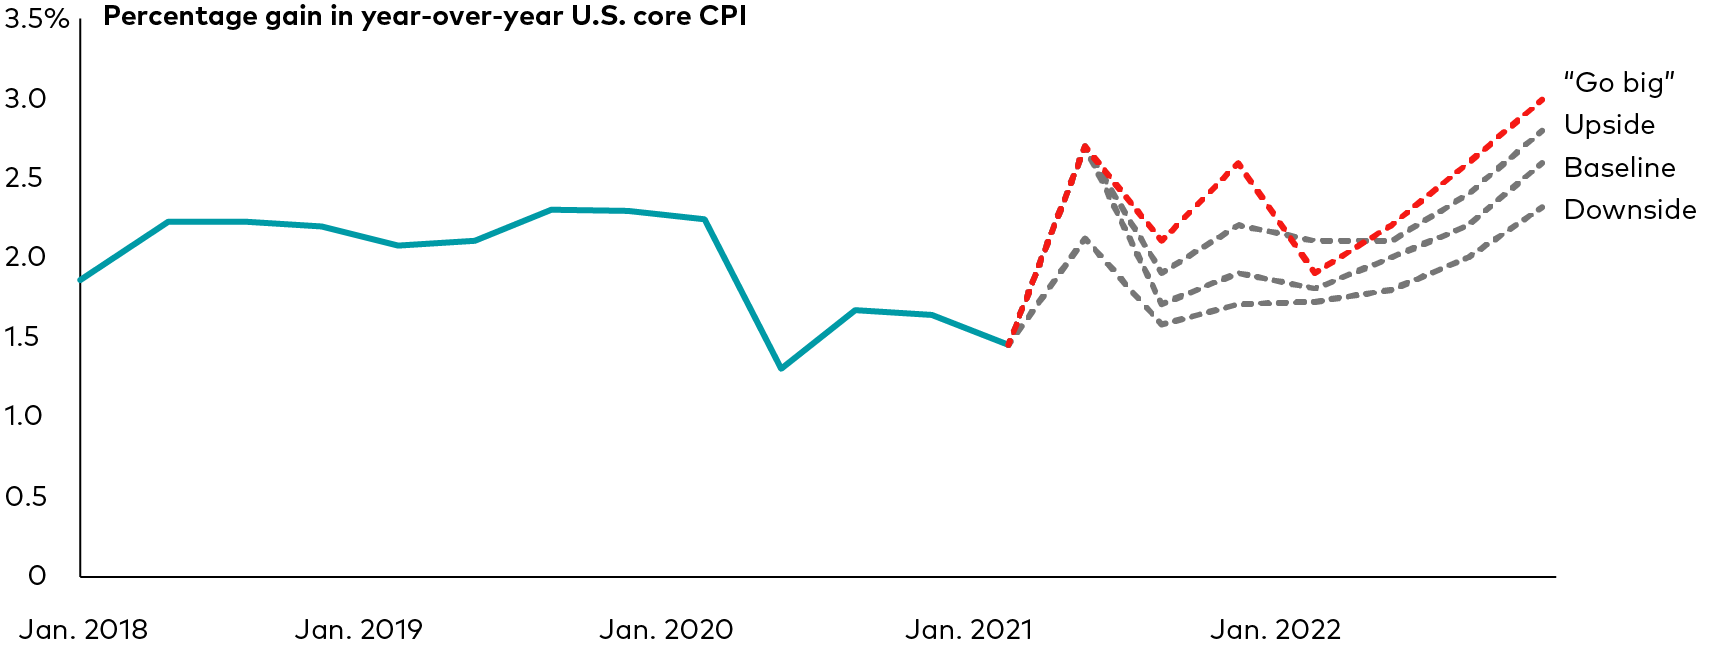 Line chart shows actual monthly year-over-year percentage changes in U.S. core CPI from January 1995 through May 2021. It also shows projected monthly year-over-year percentage changes under two scenarios from June 2021 through December 2022. The first scenario is Vanguard’s baseline forecast for U.S. core CPI, and the second is Vanguard’s “go big” upside forecast for U.S. core CPI. A horizontal band shows the legacy inflation target range of 1.75% to 2.25% that the Federal Reserve abandoned in August 2020 in favor of a policy of average inflation targeting, which allows inflation to surpass that level for some time. The chart shows that actual U.S. core CPI spiked to almost 3% in April 2021. The projection of Vanguard’s baseline forecast scenario shows U.S. core CPI exceeding 3% at times in 2021 but falling below that in 2022. The projection of Vanguard’s “go big” upside forecast scenario shows U.S. core CPI remaining consistently above 3% in 2021 before moderating in 2022.  